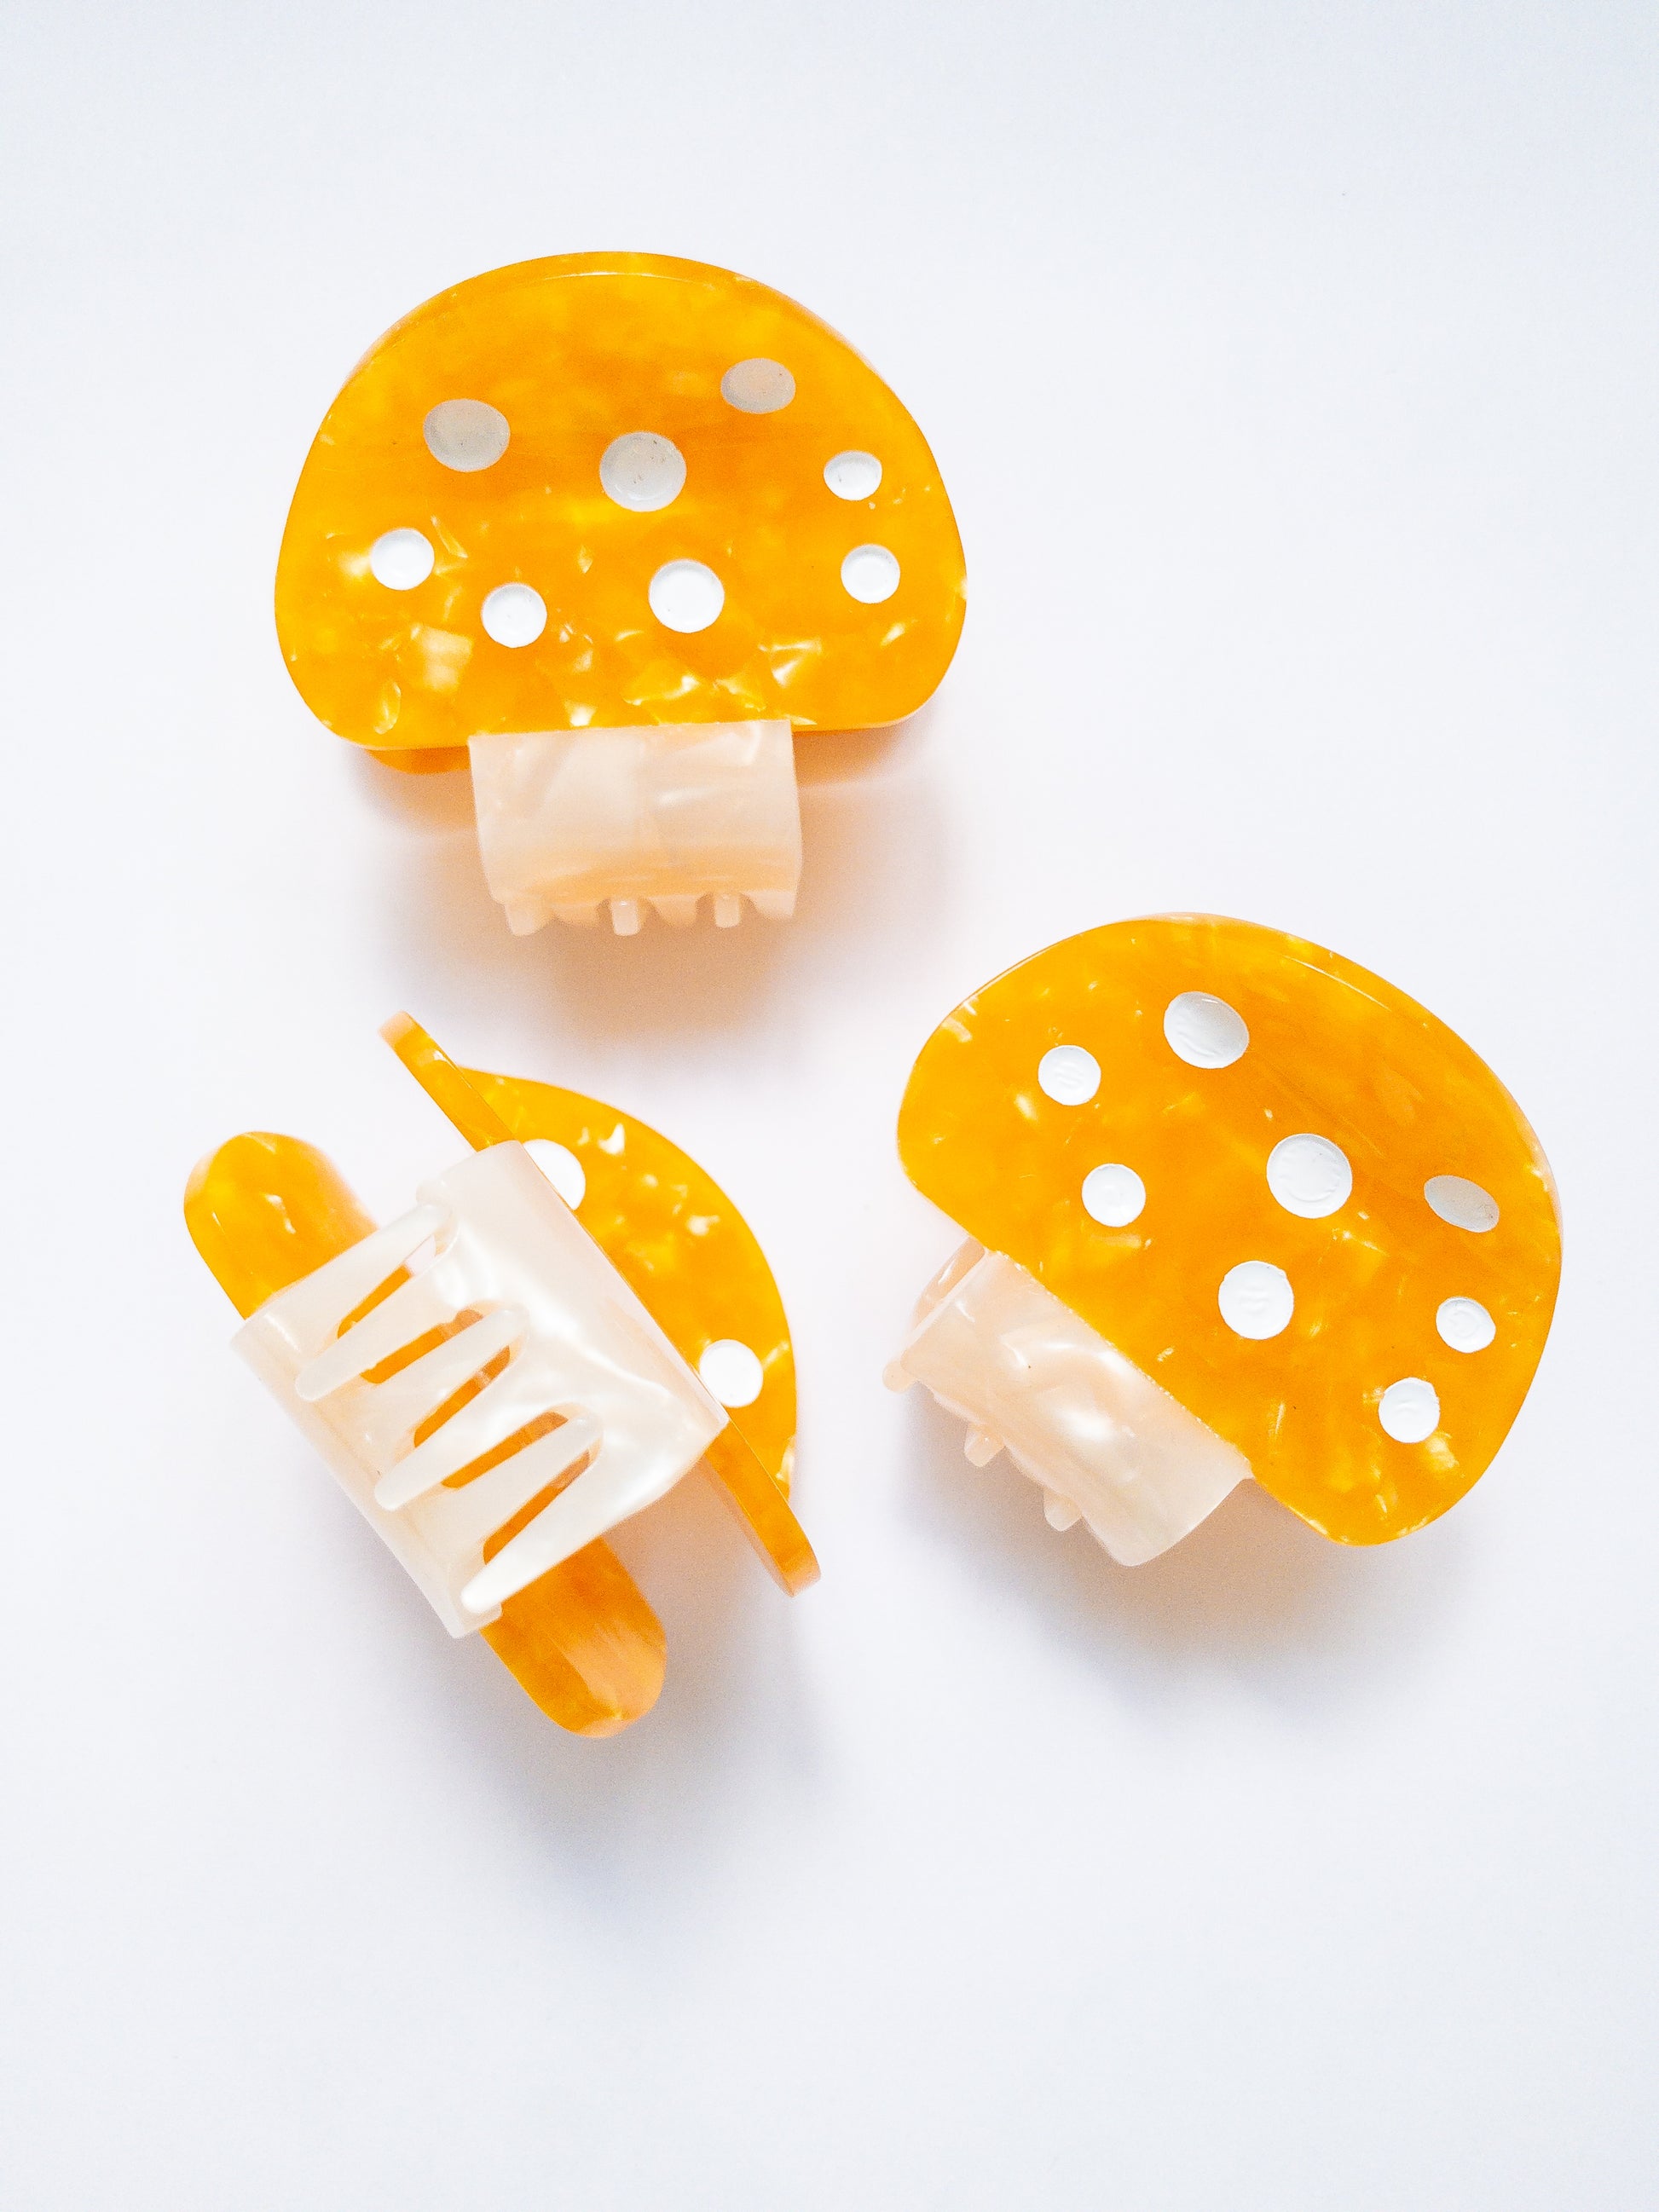 Gorgeous acetate mushroom hair claw clip! These claw clips are a medium size, great for half up hairstyles. Grab one in a pretty, speckled light orange or red.